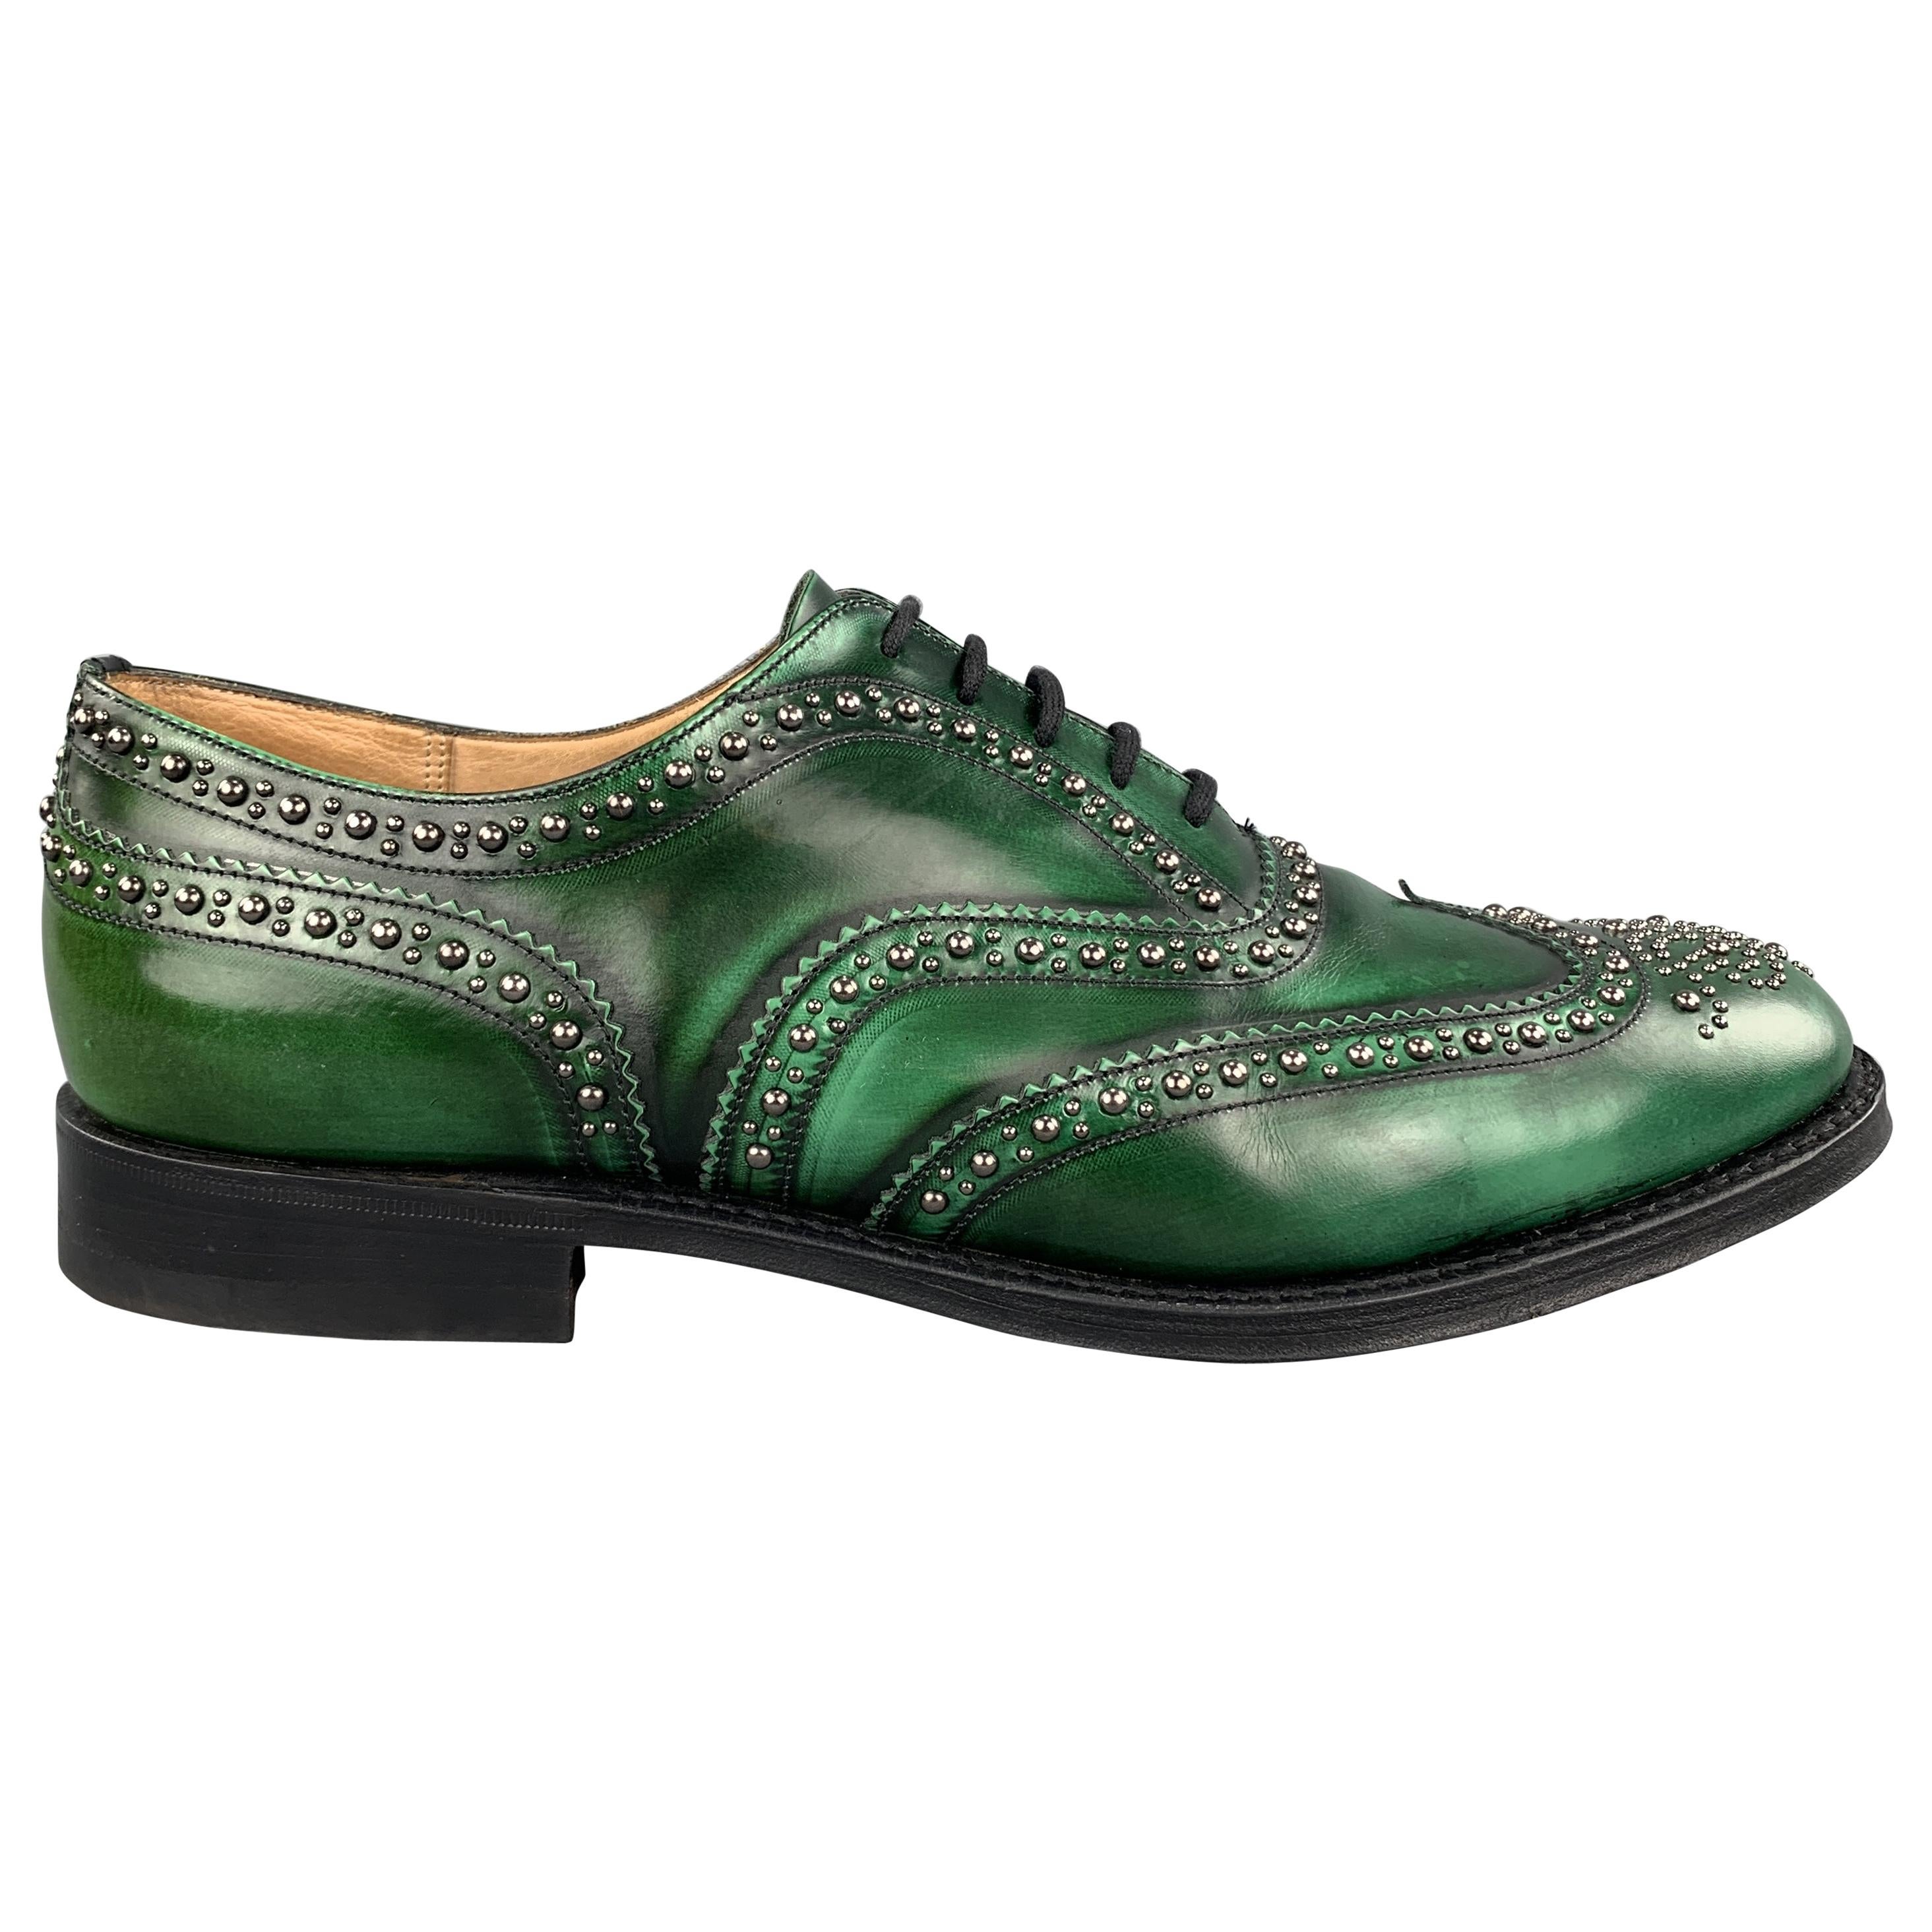 CHURCH'S Size 10.5 Studded Green Leather Wingtip Lace Up Shoe